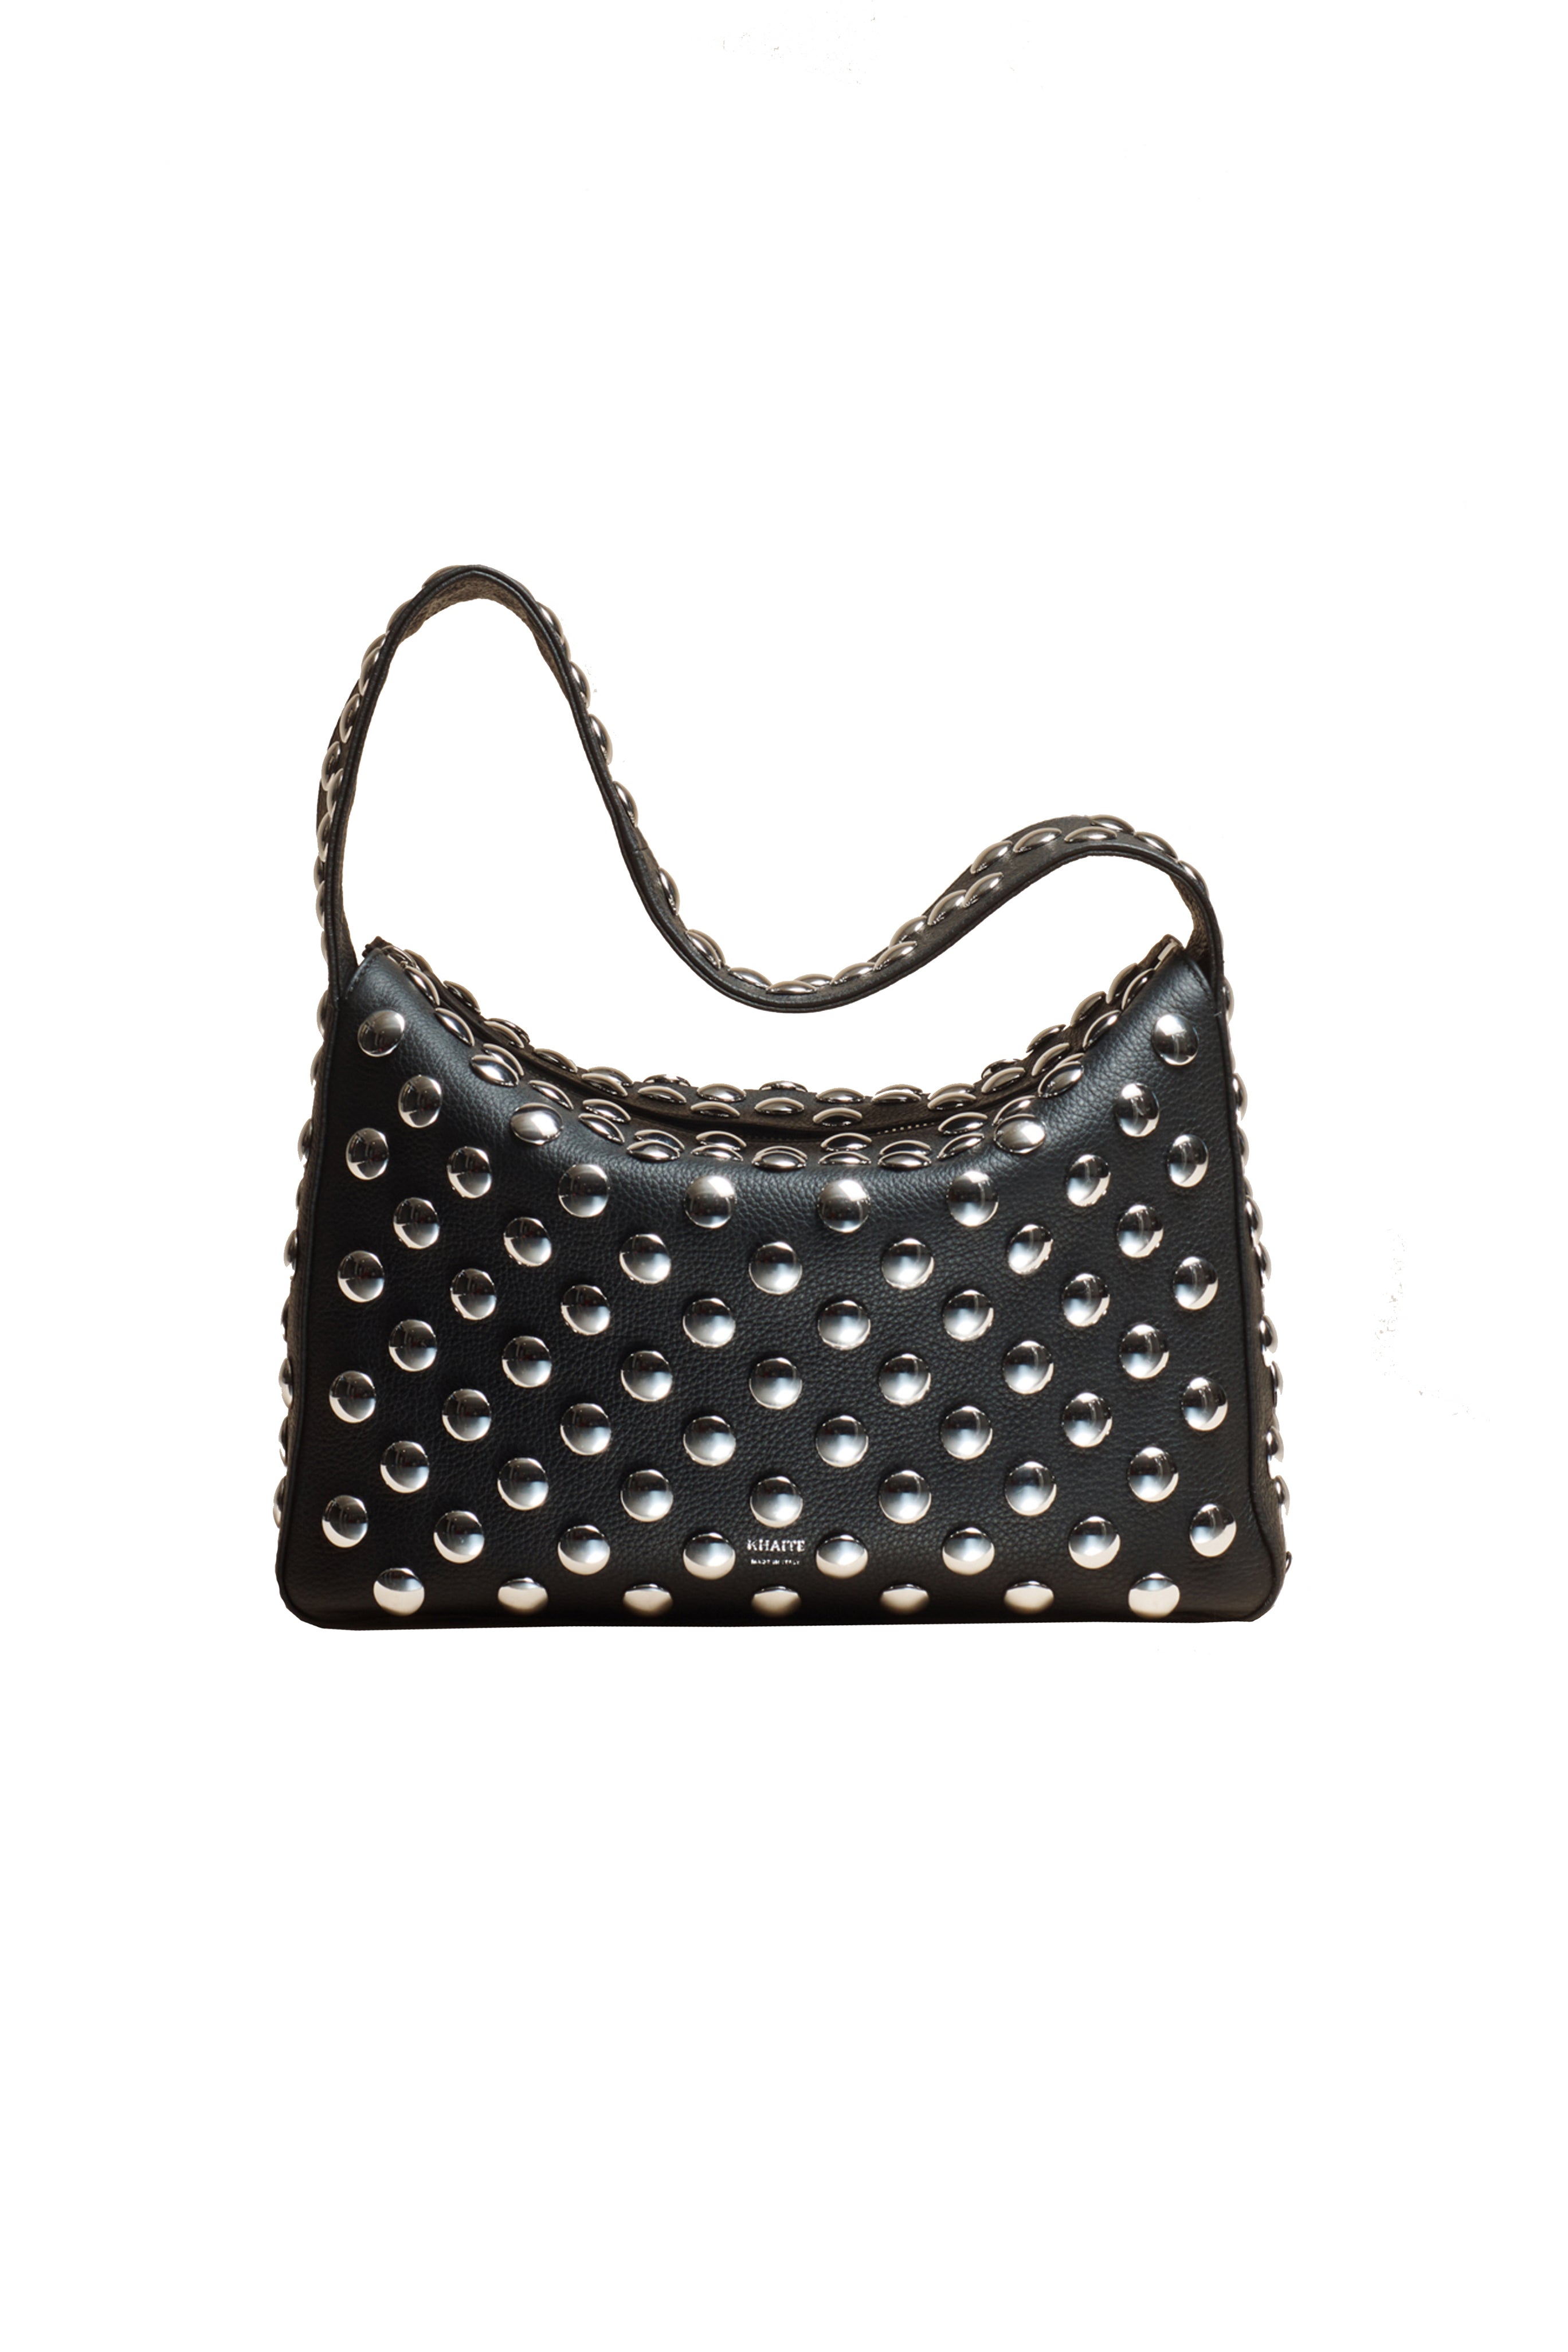 A Vintage Prada Studded black Leather Satchel Bag, Featuring A Studded  Leather Body, Exterior Zip Po